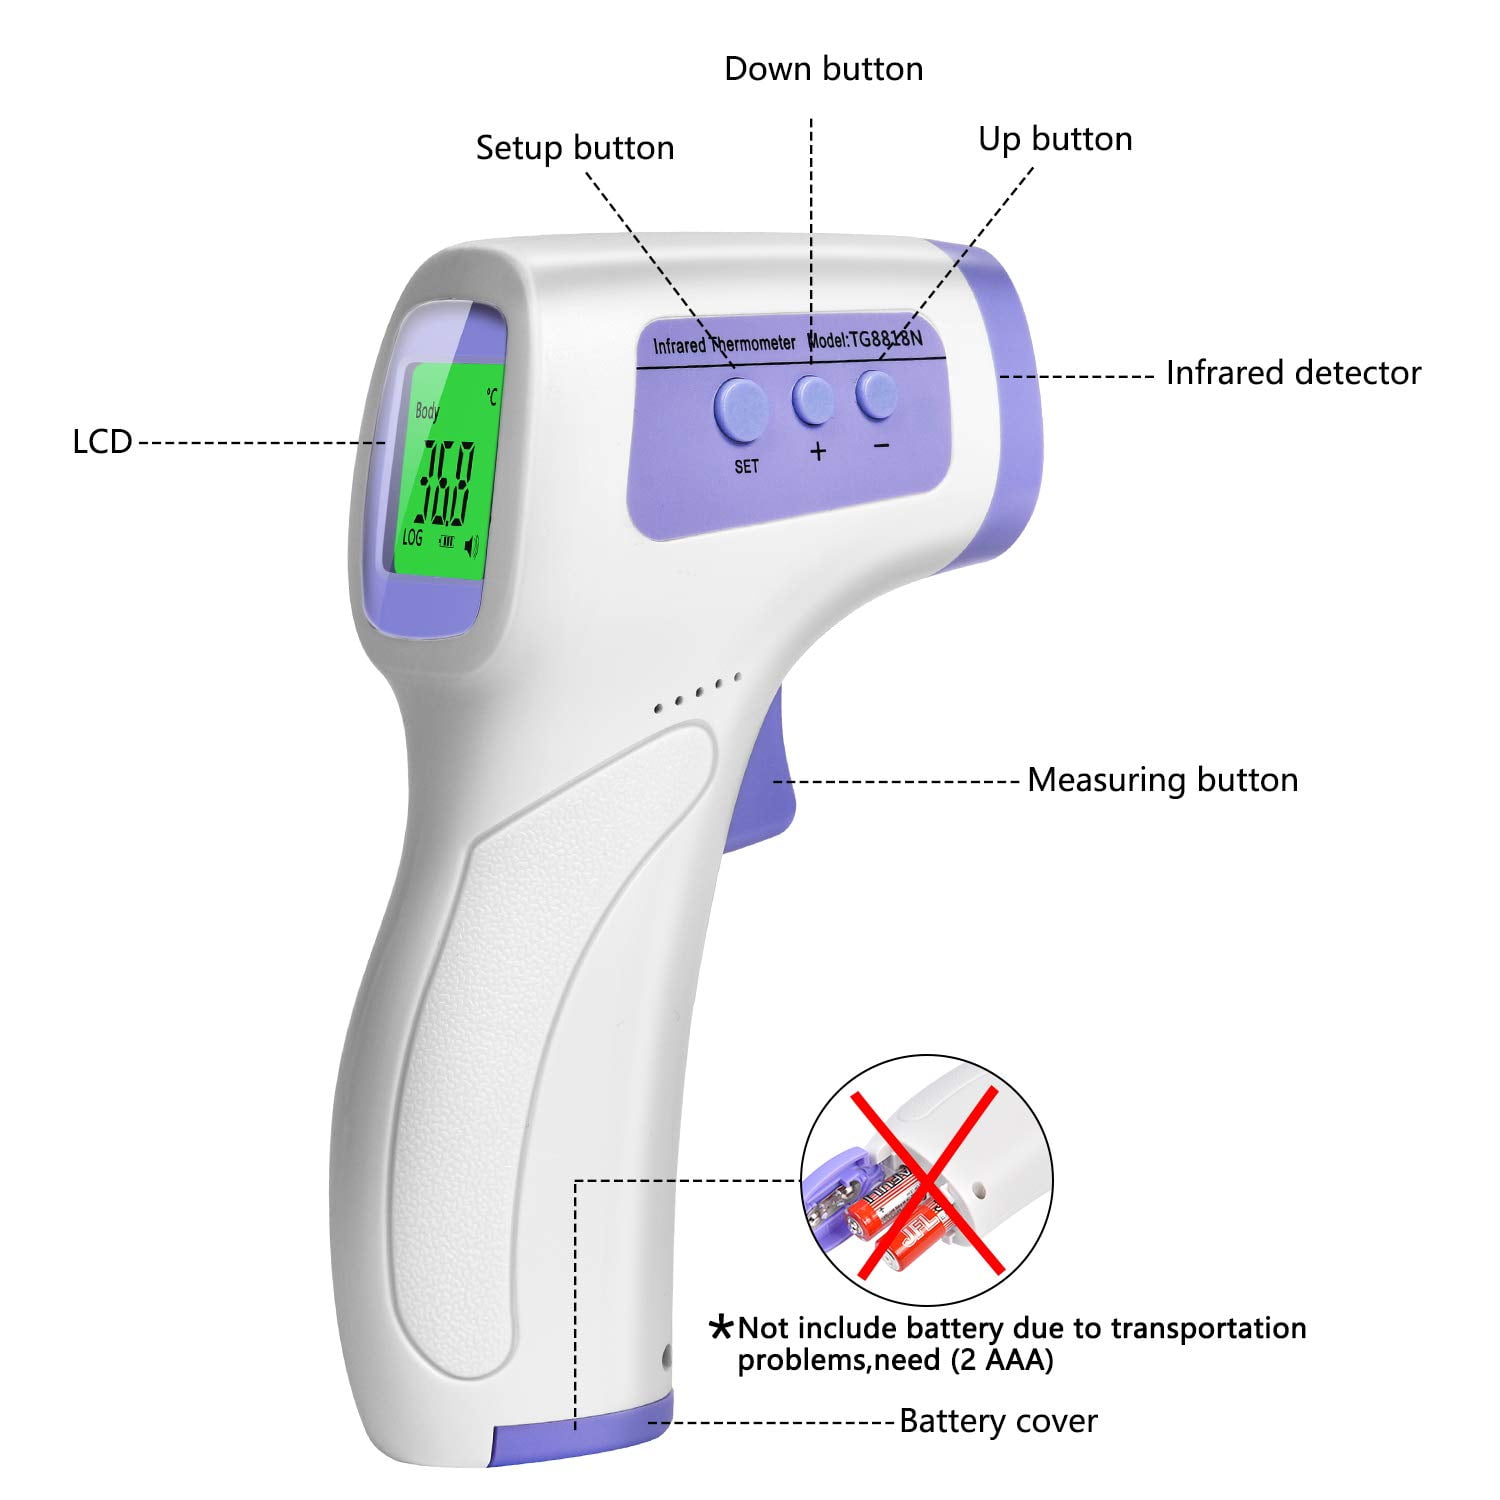 Infrared thermometer Bodytemp 478, Infrared thermometers, Temperature and  monitoring, Measuring Instruments, Labware